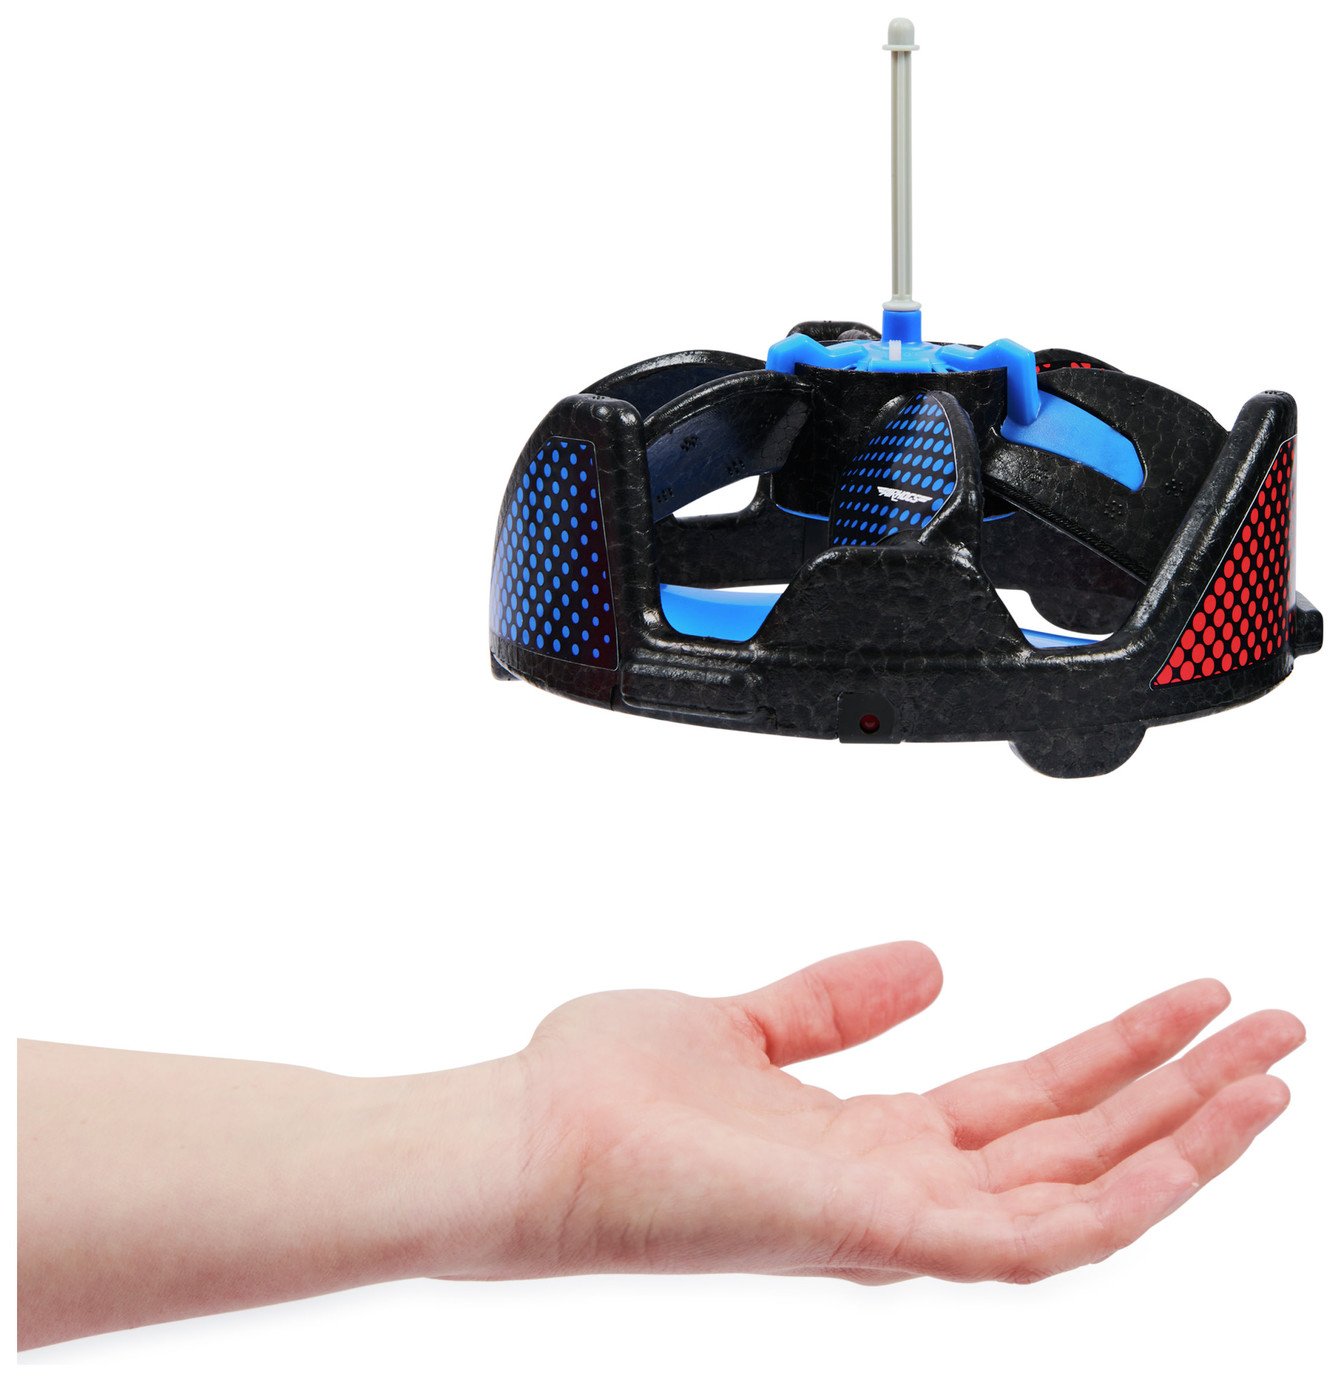 Air Hogs Gravitor Motion Sensor Flying Drone review